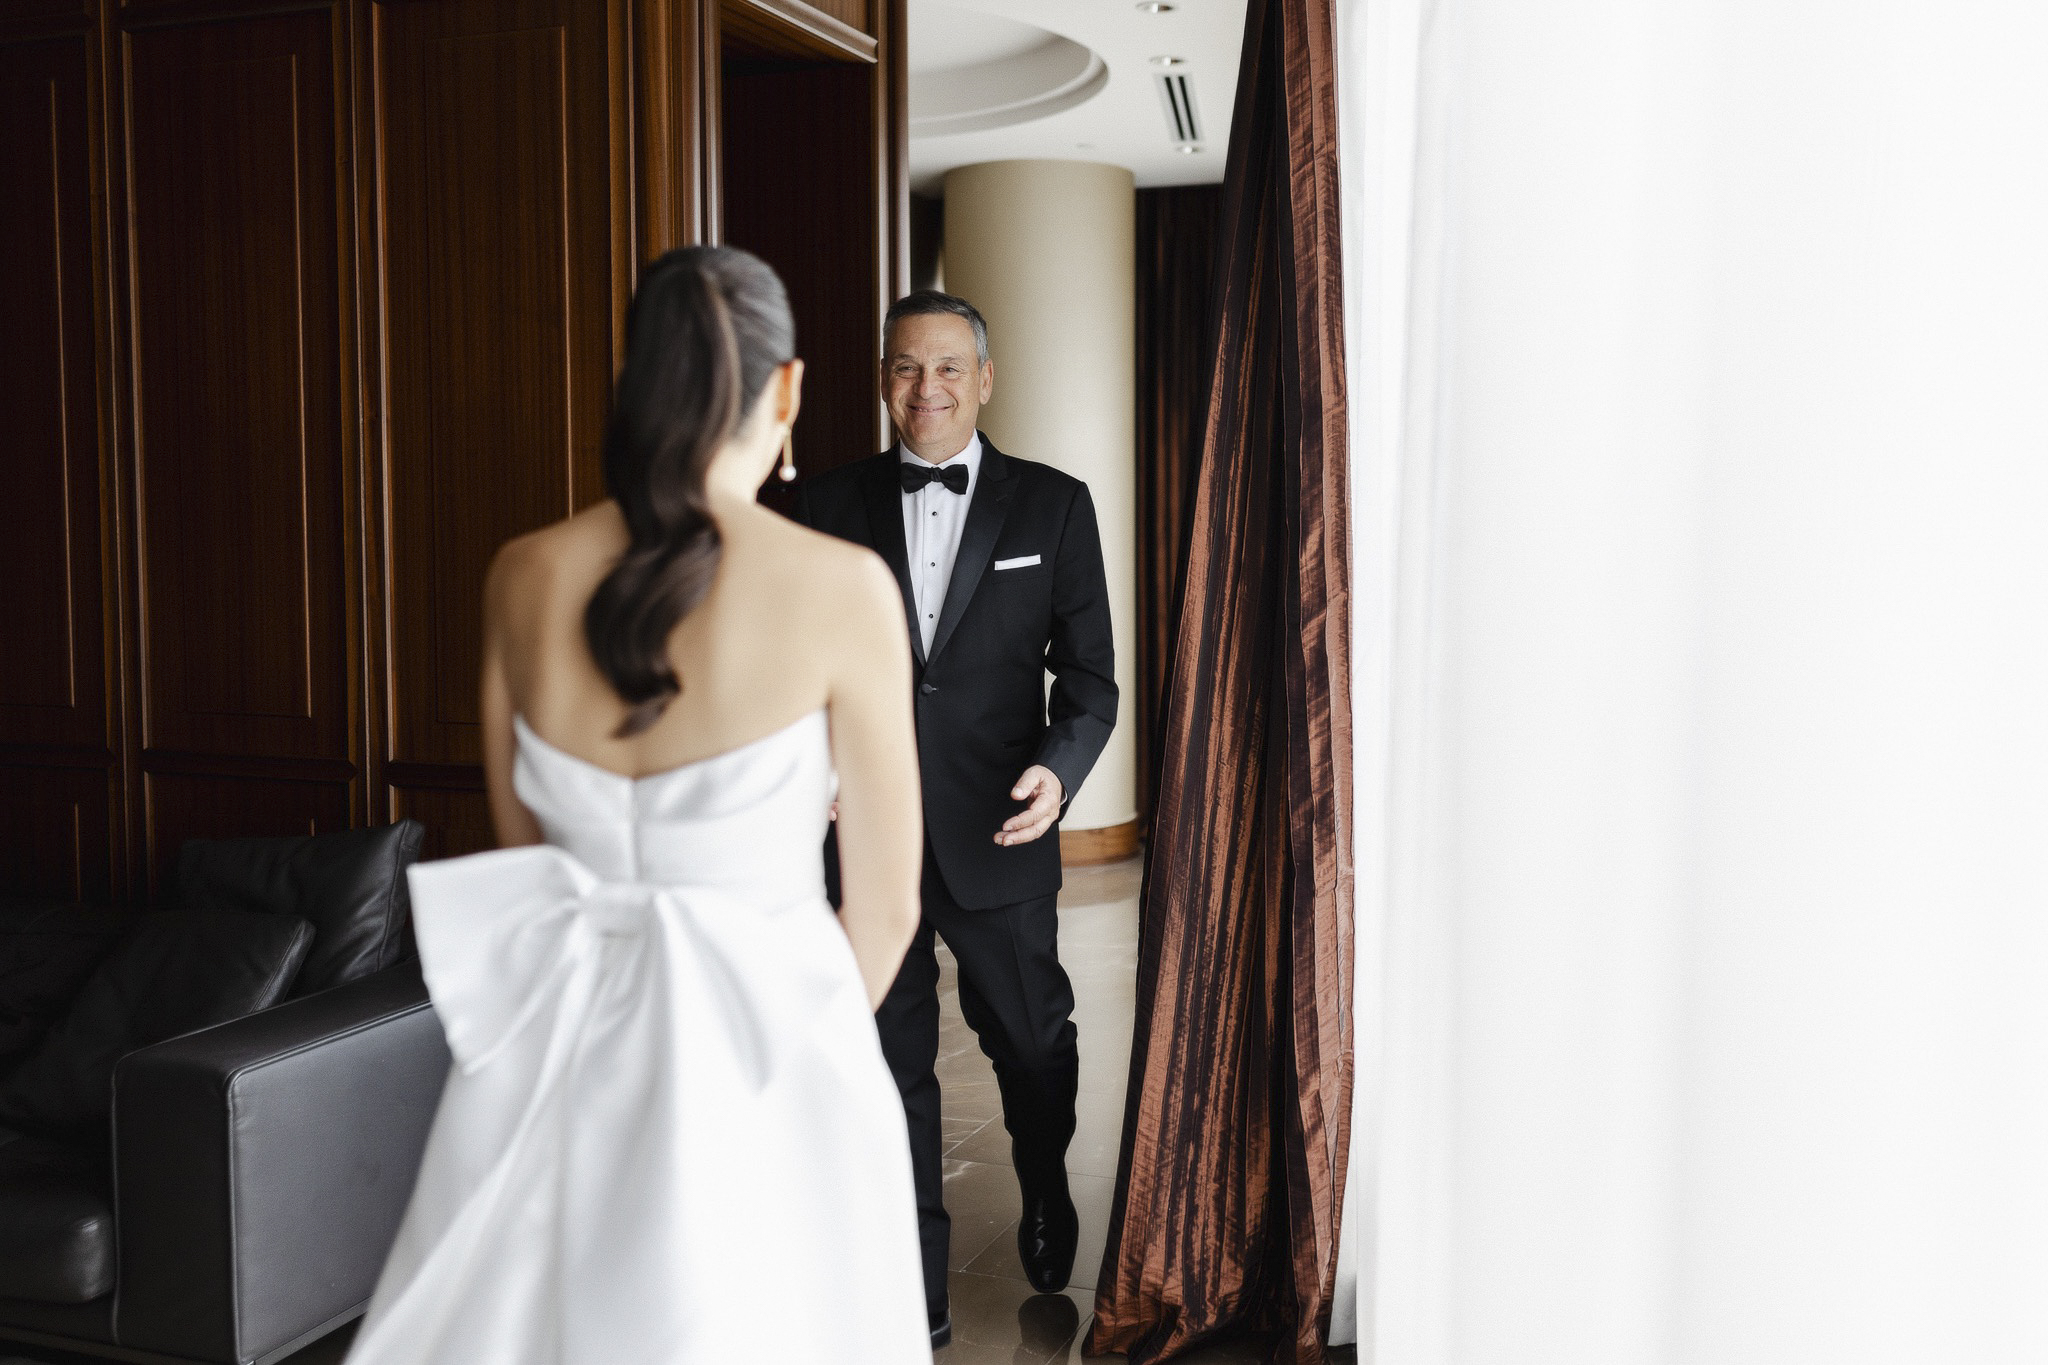 Dad looking at daughter (bride) for first time in wedding dress.